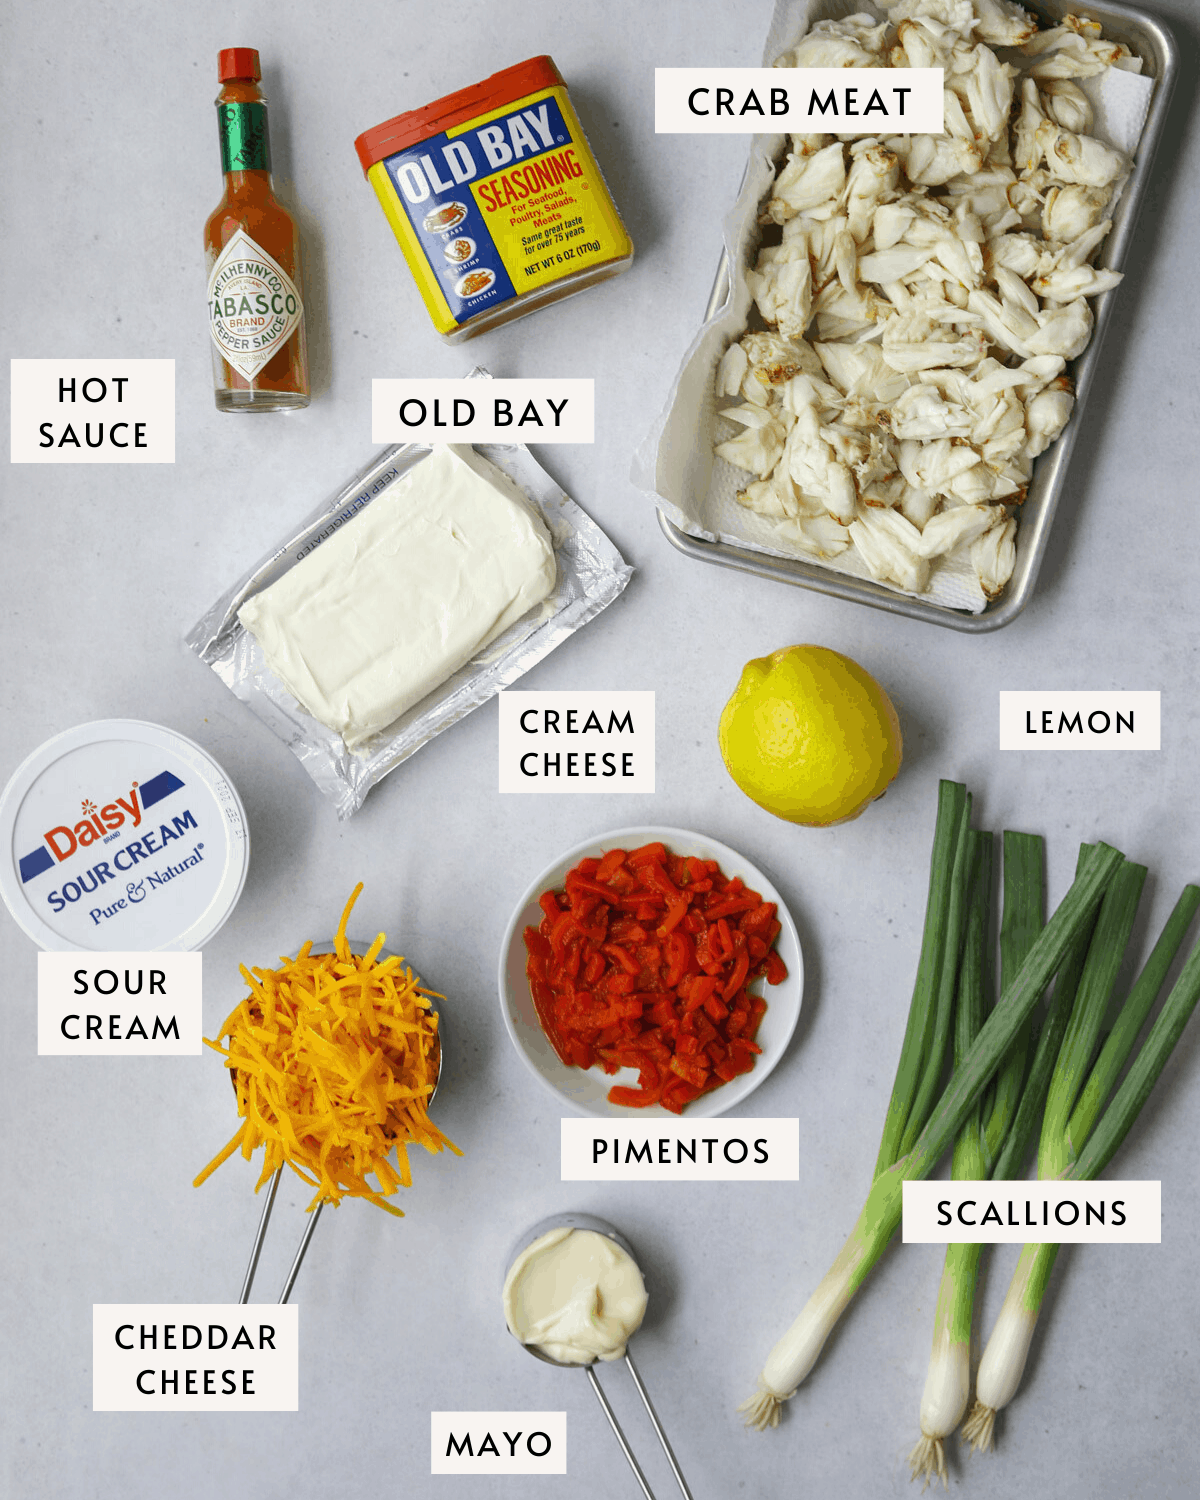 recipe ingredients on a blue background, crab meat, cheddar cheese, pimentos, scallions, cream cheese